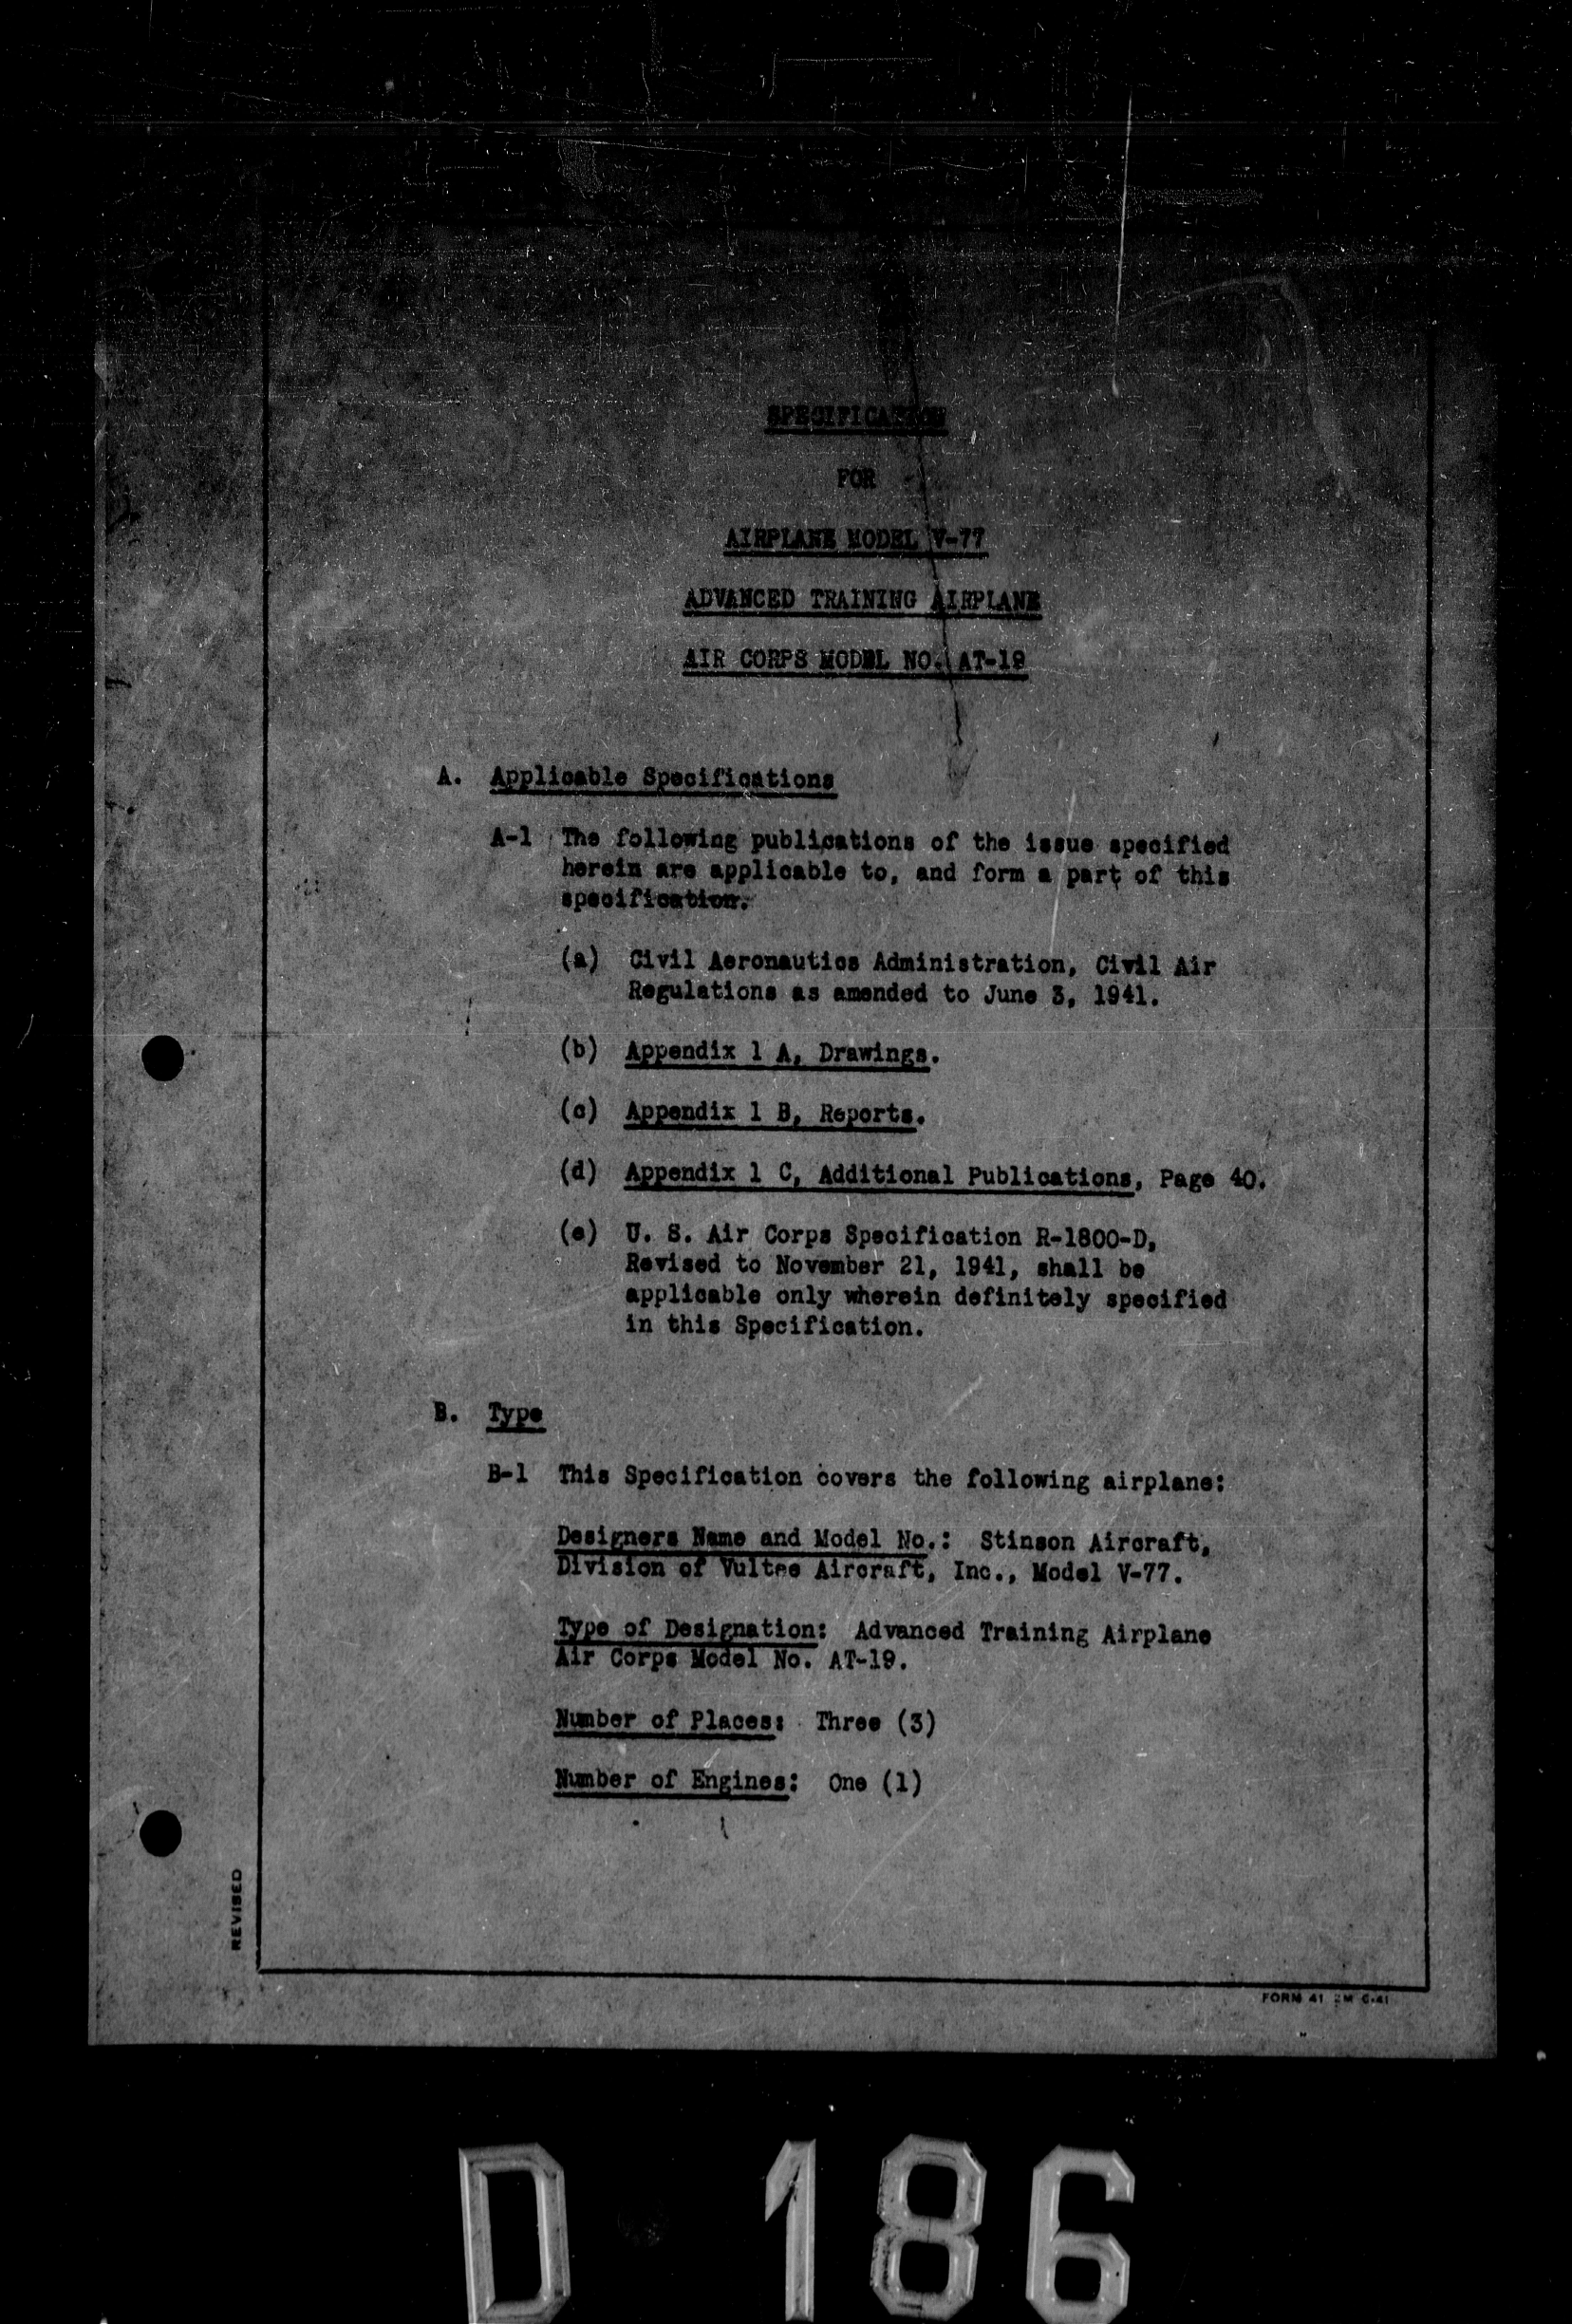 Sample page 5 from AirCorps Library document: Specification for Model V-77 Airplane, Model AT-19